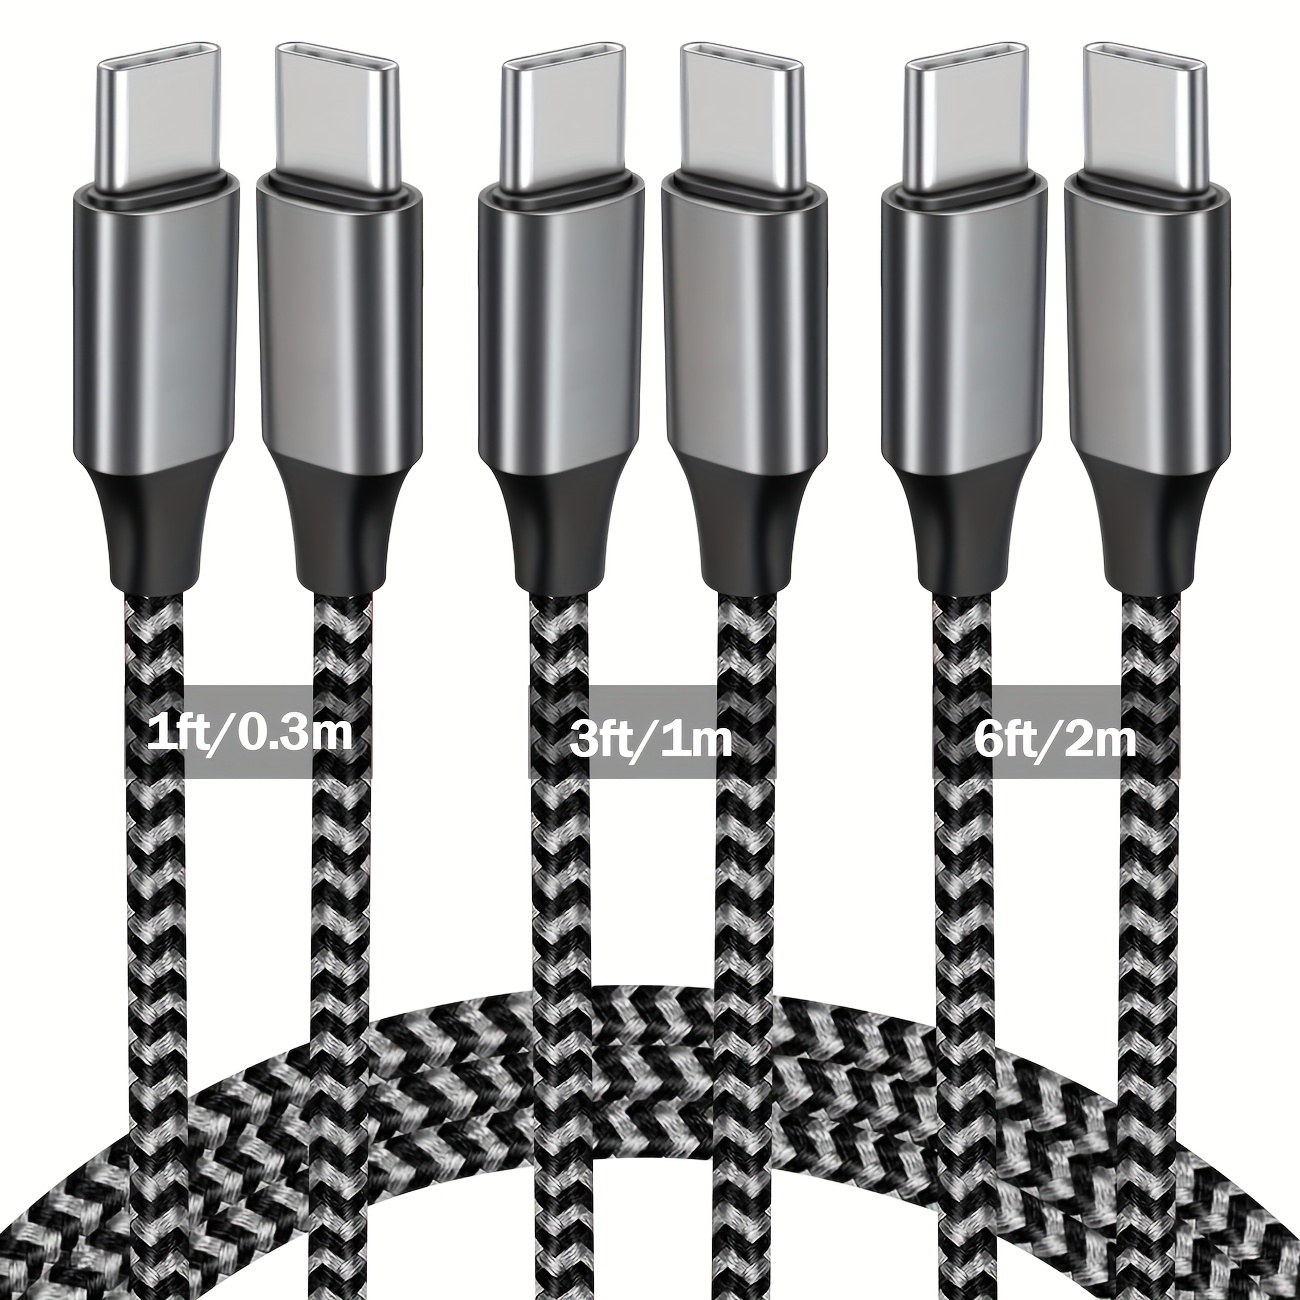  USB Type C Cable, (2-Pack 3FT) USB C Charger Cable Nylon  Braided Fast Charging Sync Cord Compatible iPhone 15/15 Pro Max Samsung  Galaxy S10 S9 S8 Plus,Note 9 8, LG G7